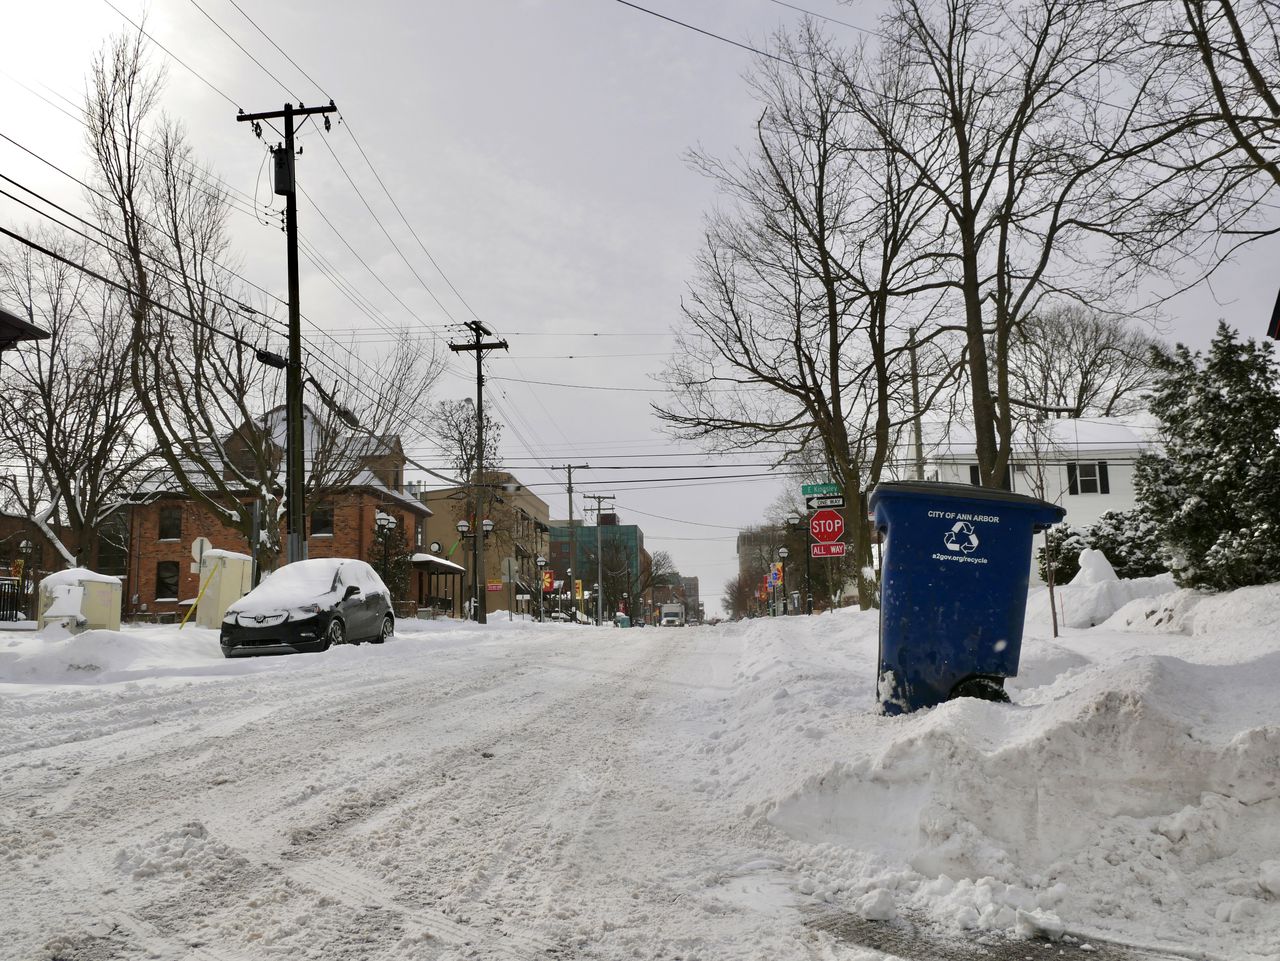 A barren residential street covered in snow with dead trees in the background